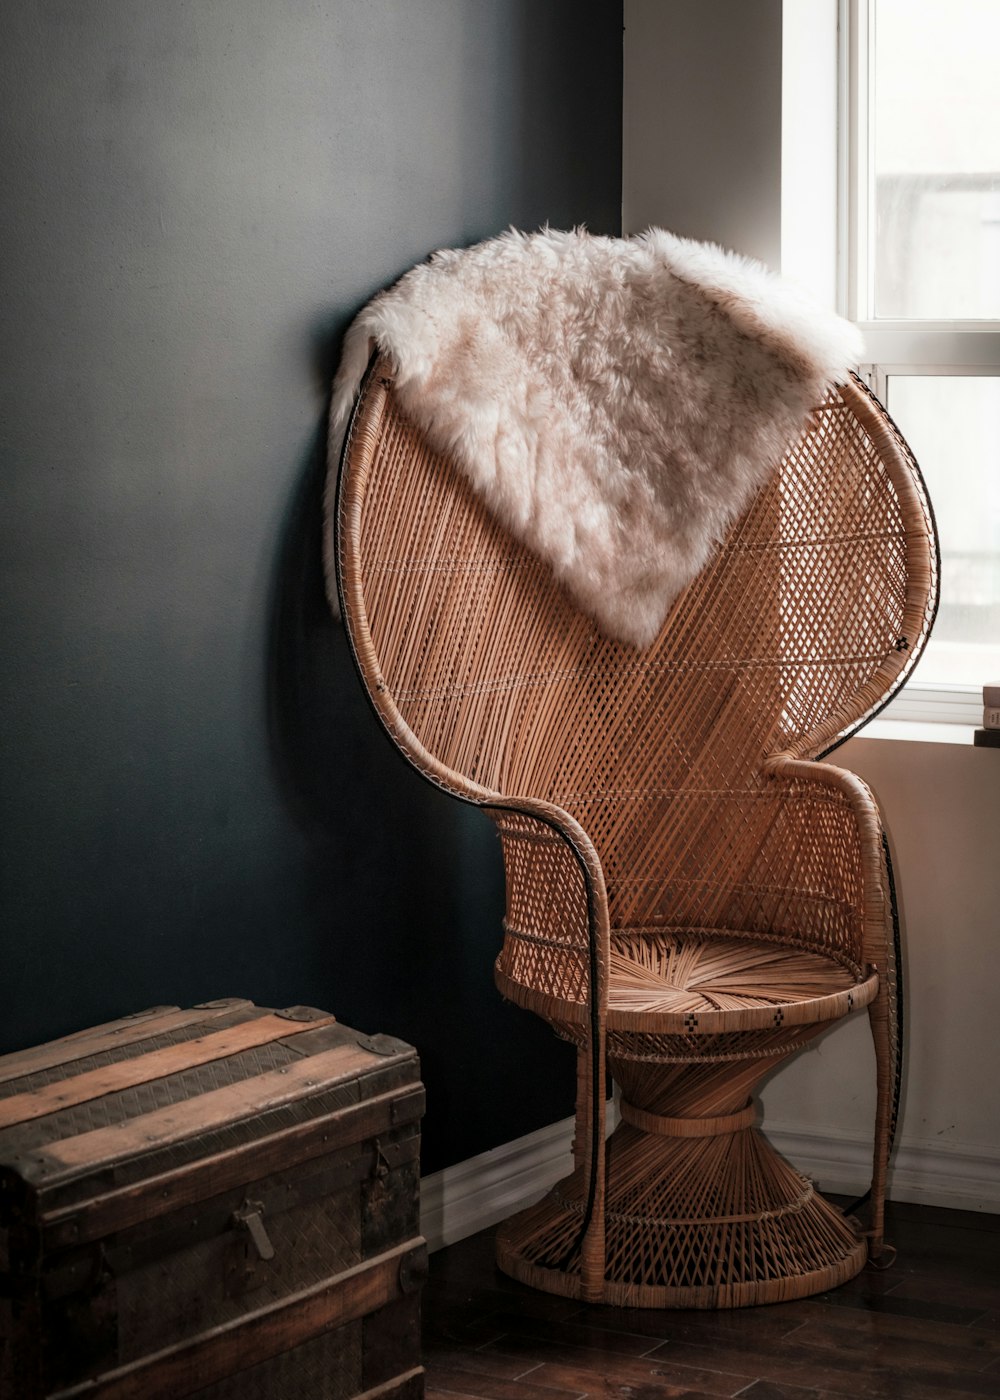 white fur textile on brown wooden chair